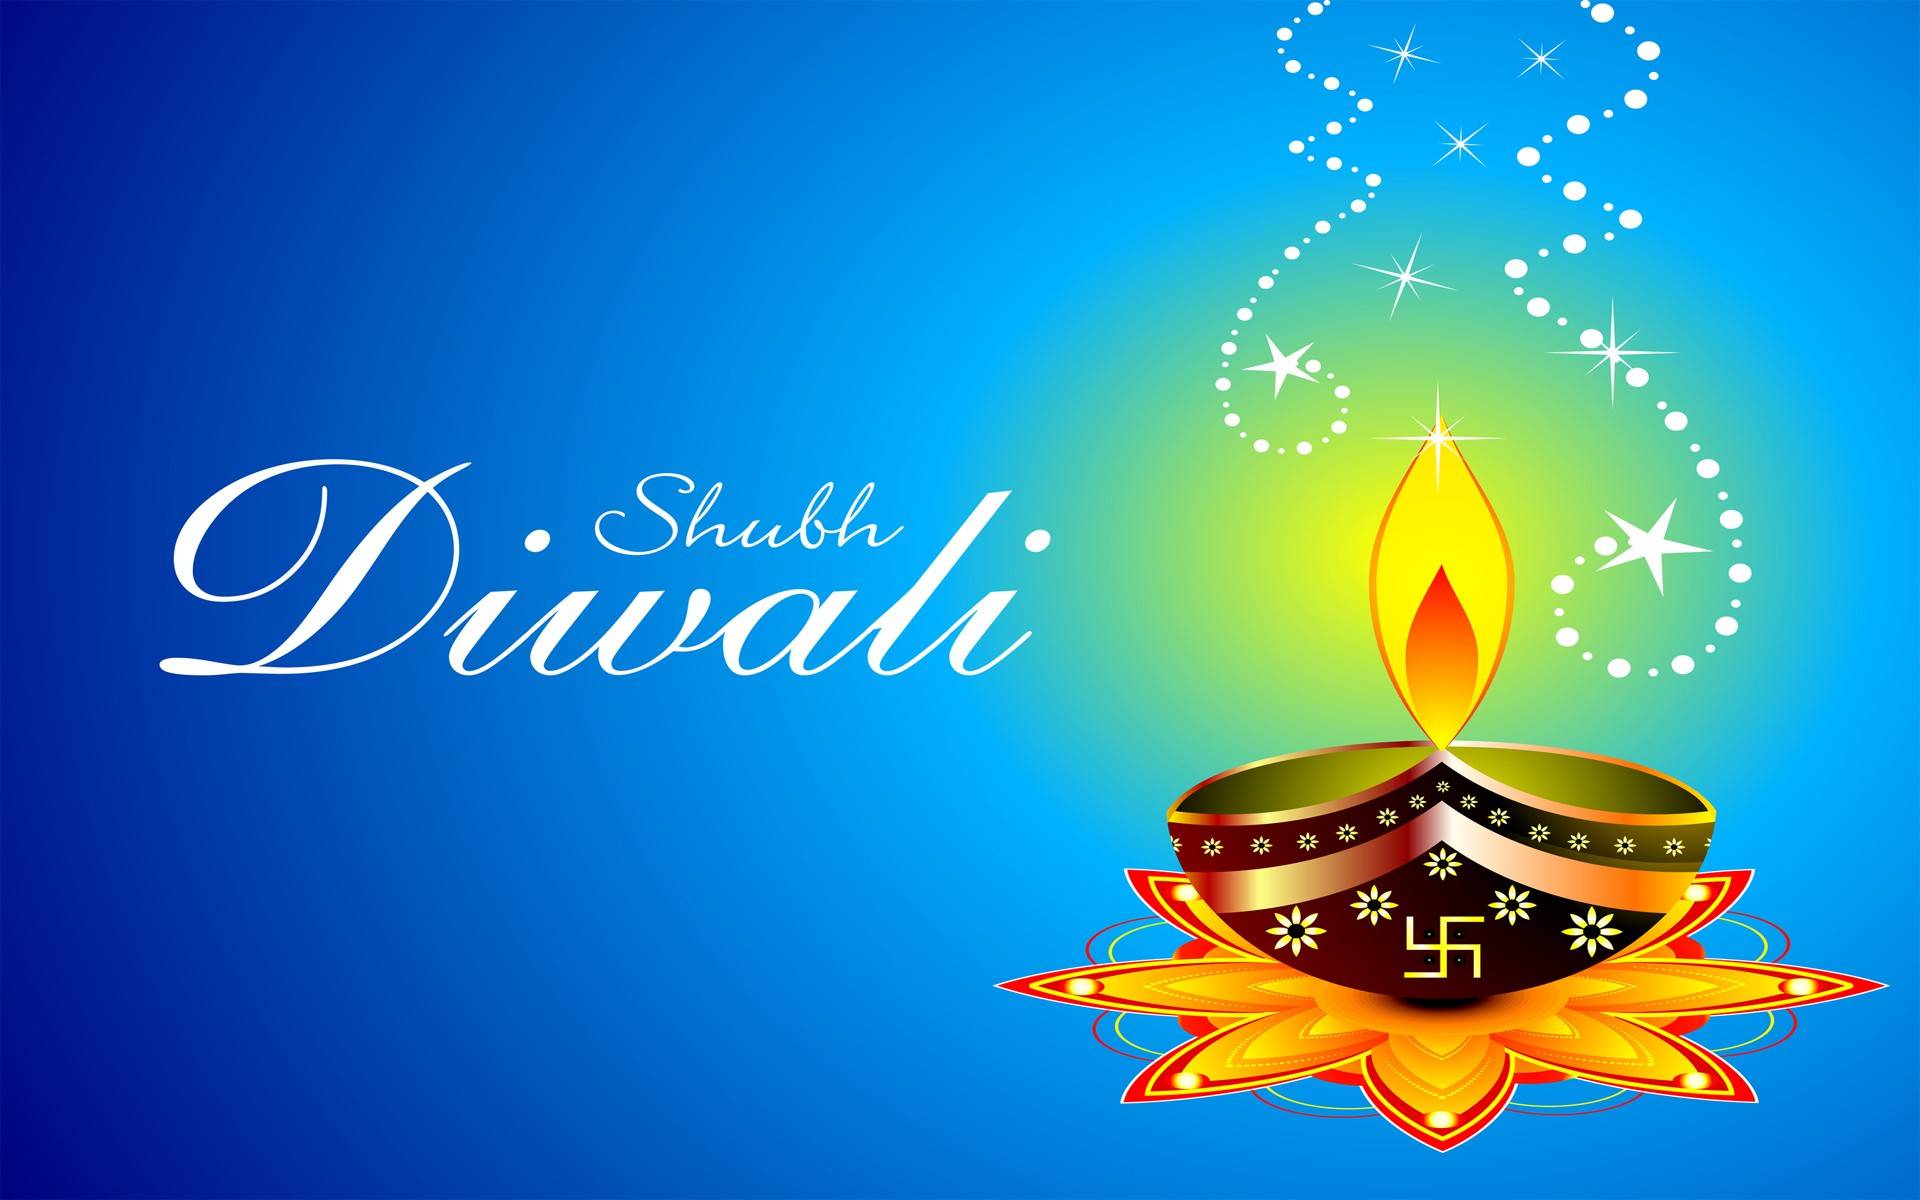 Happy Diwali Image HD Quotes Wishes Wallpaper